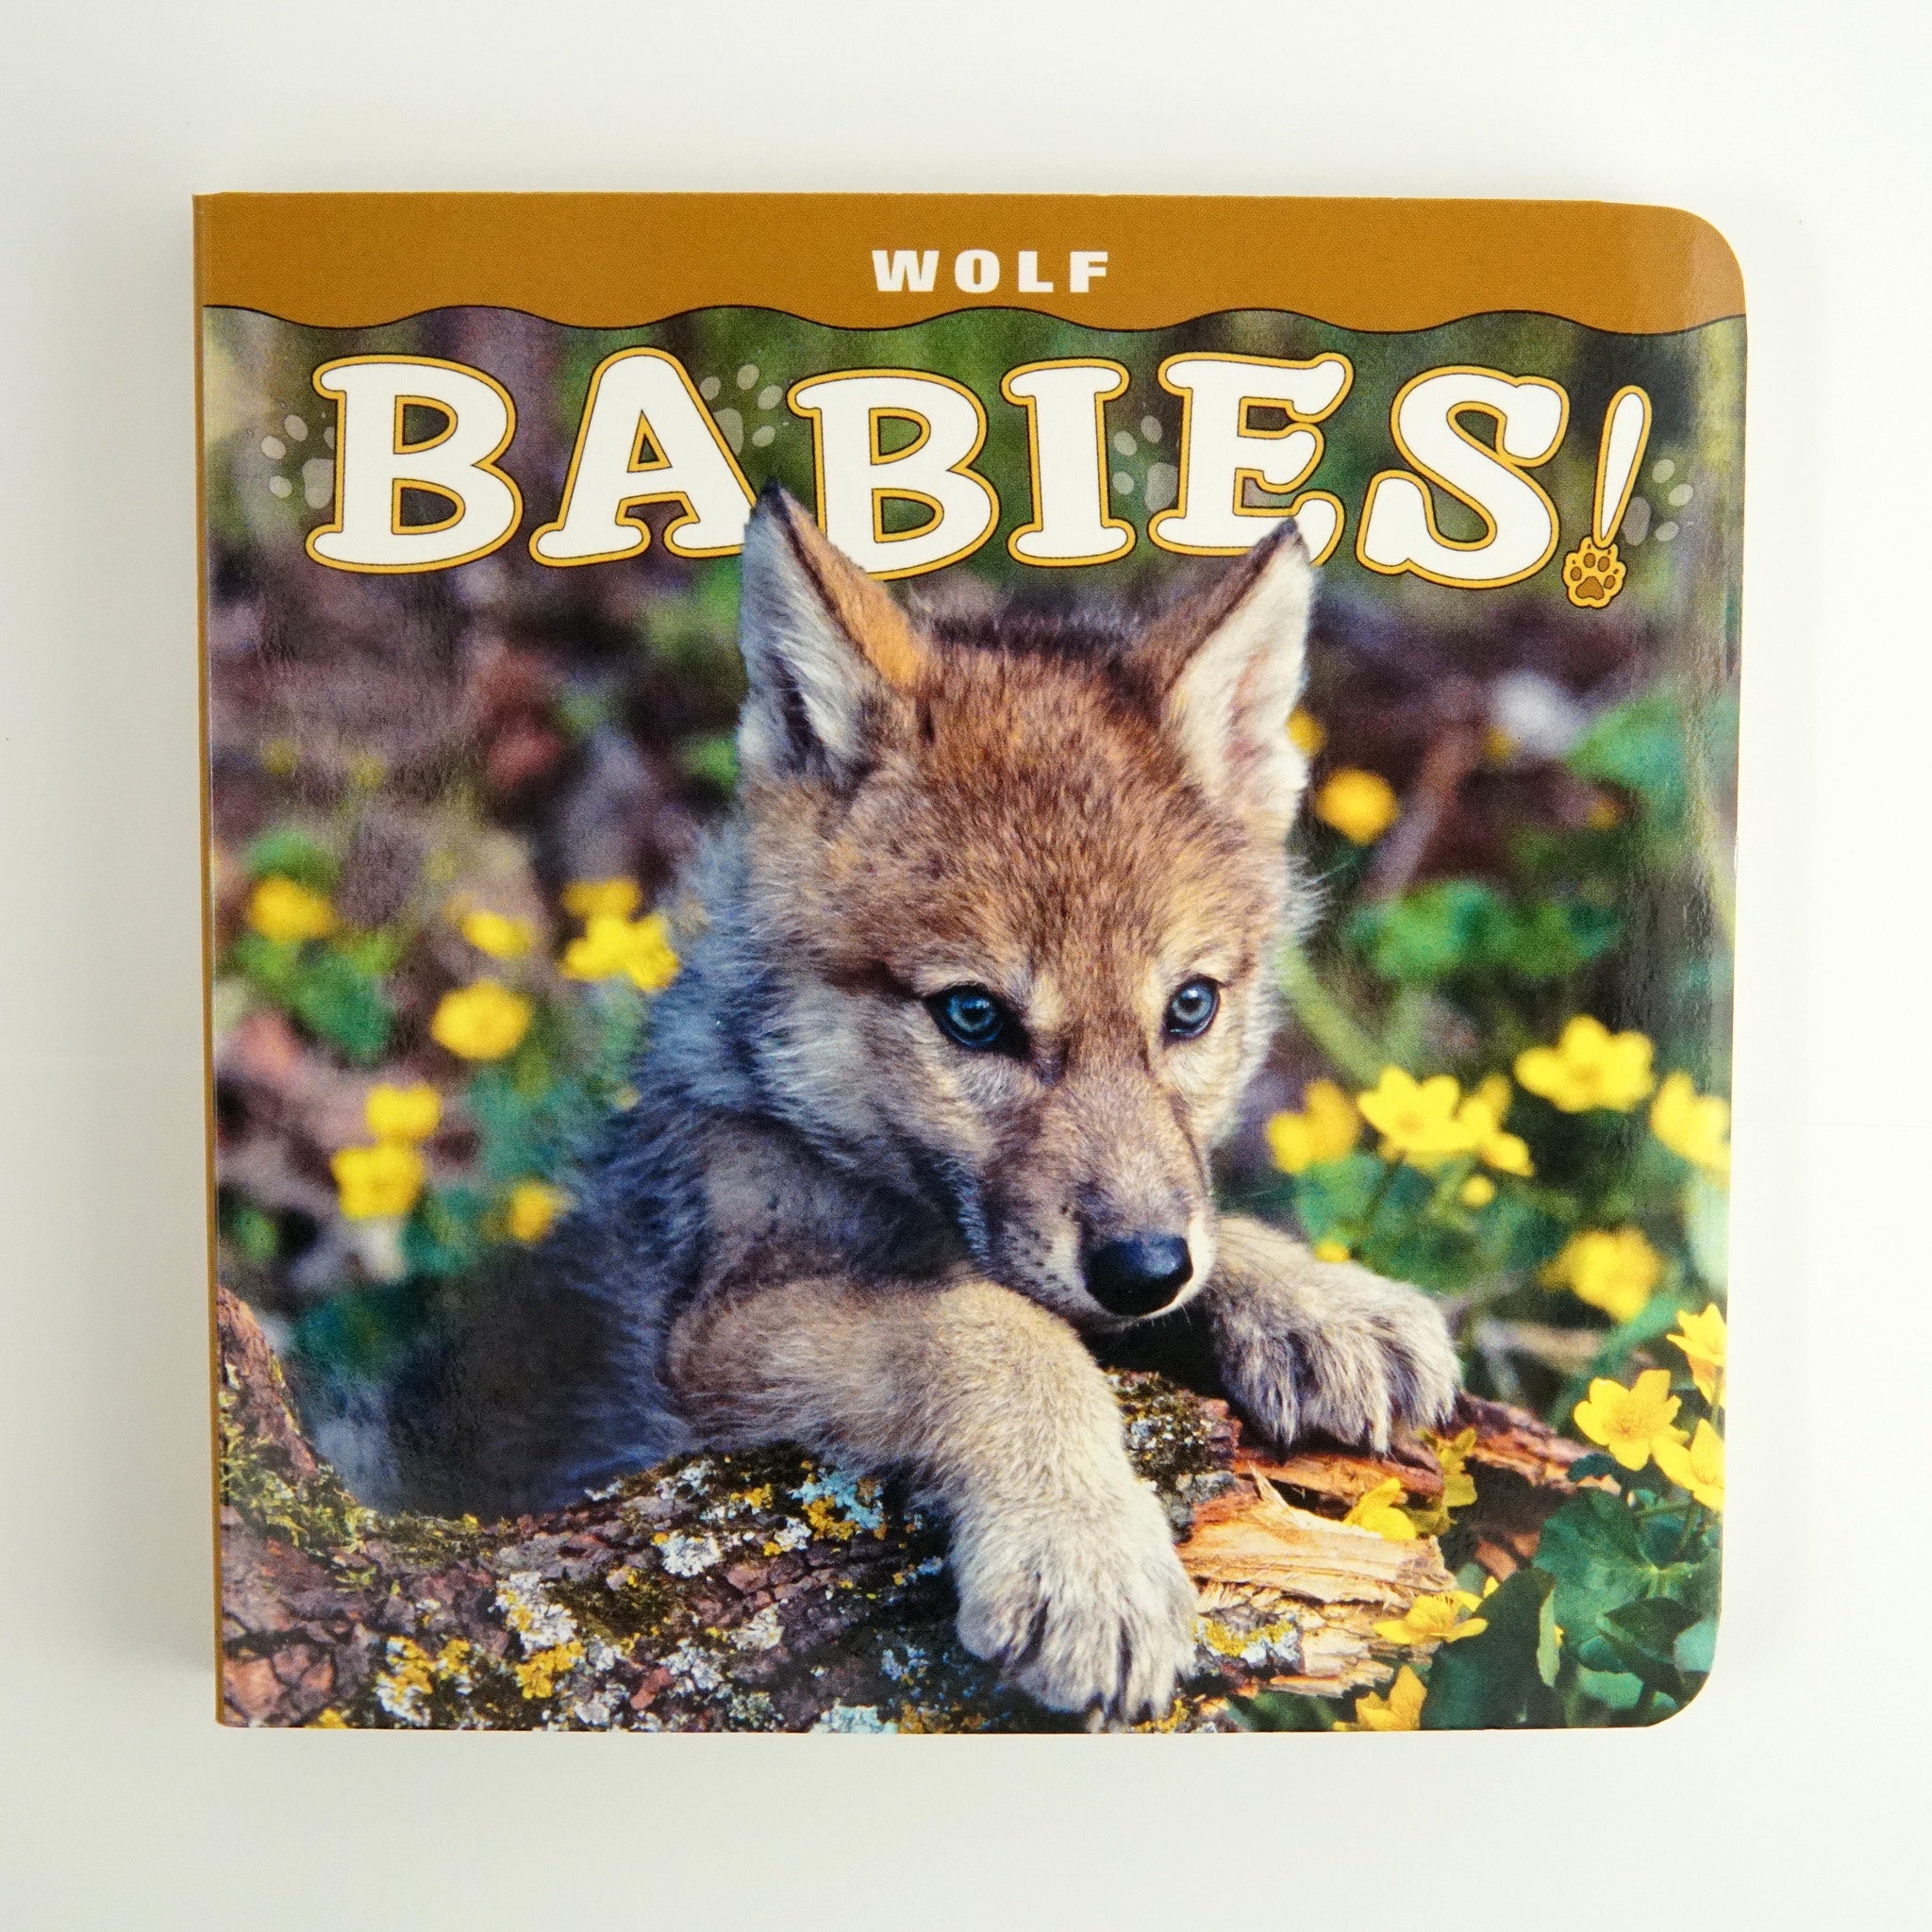 BK 20 WOLF BABIES! BY L. HUSAR, M. HUSAR #21037894 D2 AUG23